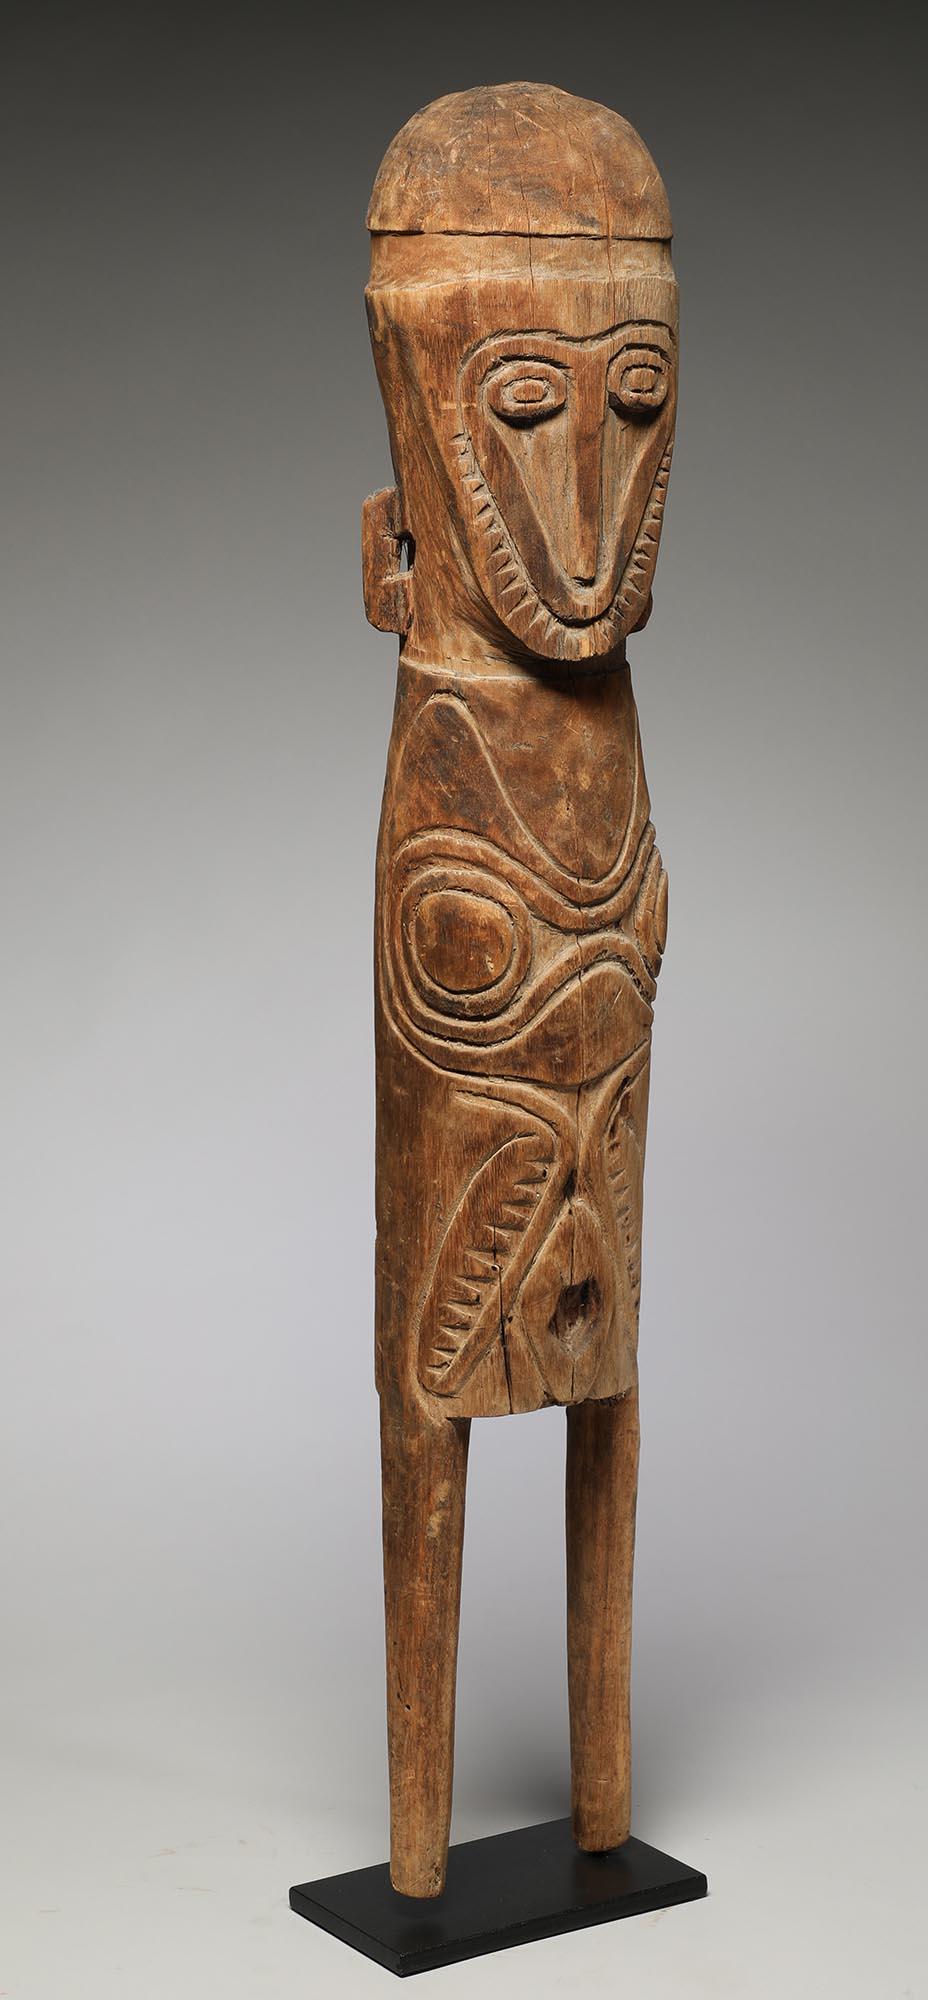 Large carved light wood standing stylized figure with geometric face, second face in body with wild arms. Projecting rectangular ears. Carved 